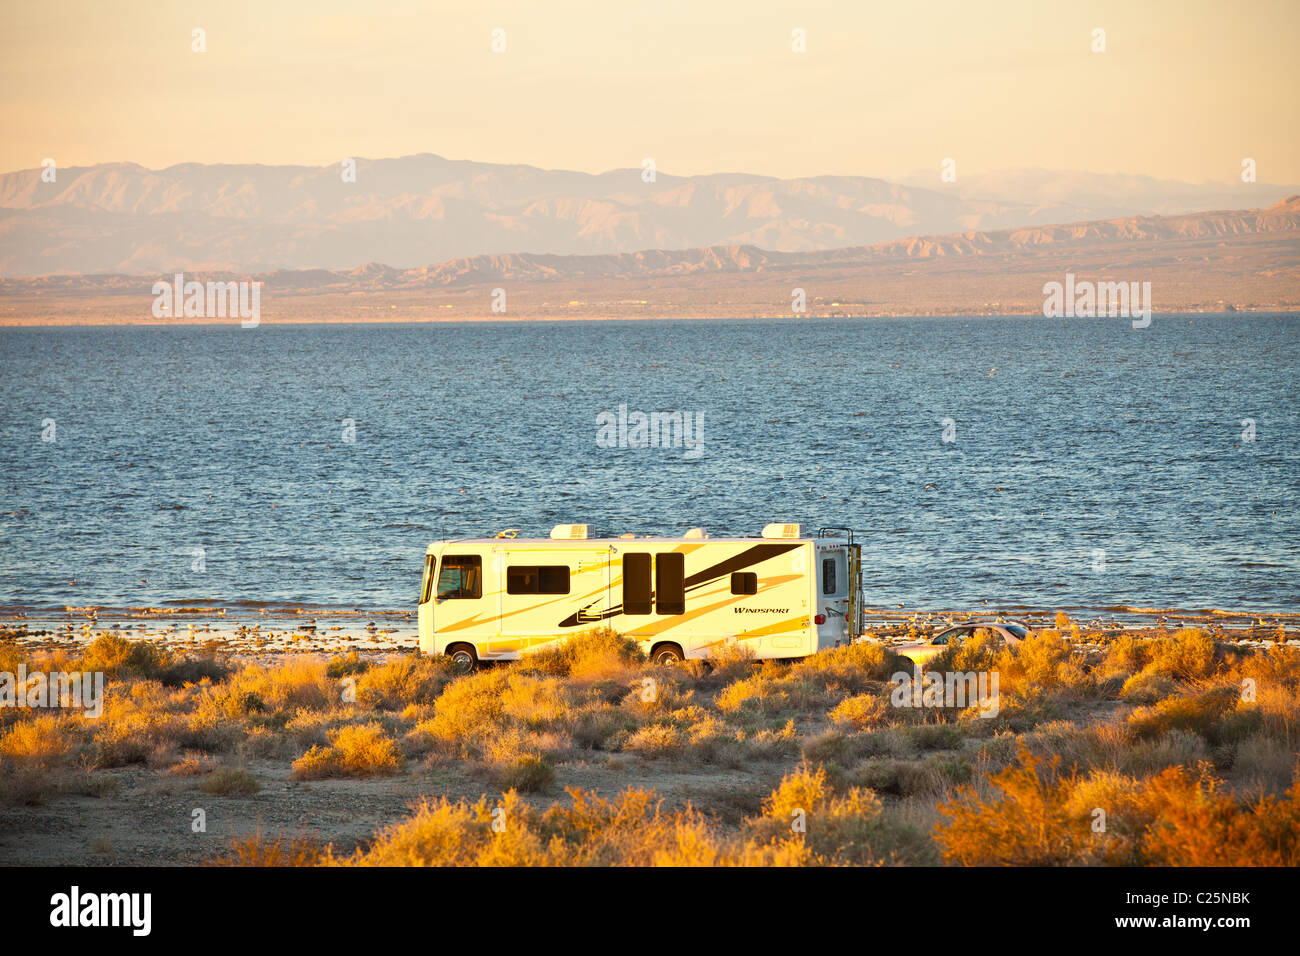 Camper along the coast of the Salton Sea Imperial Valley, CA. Stock Photo